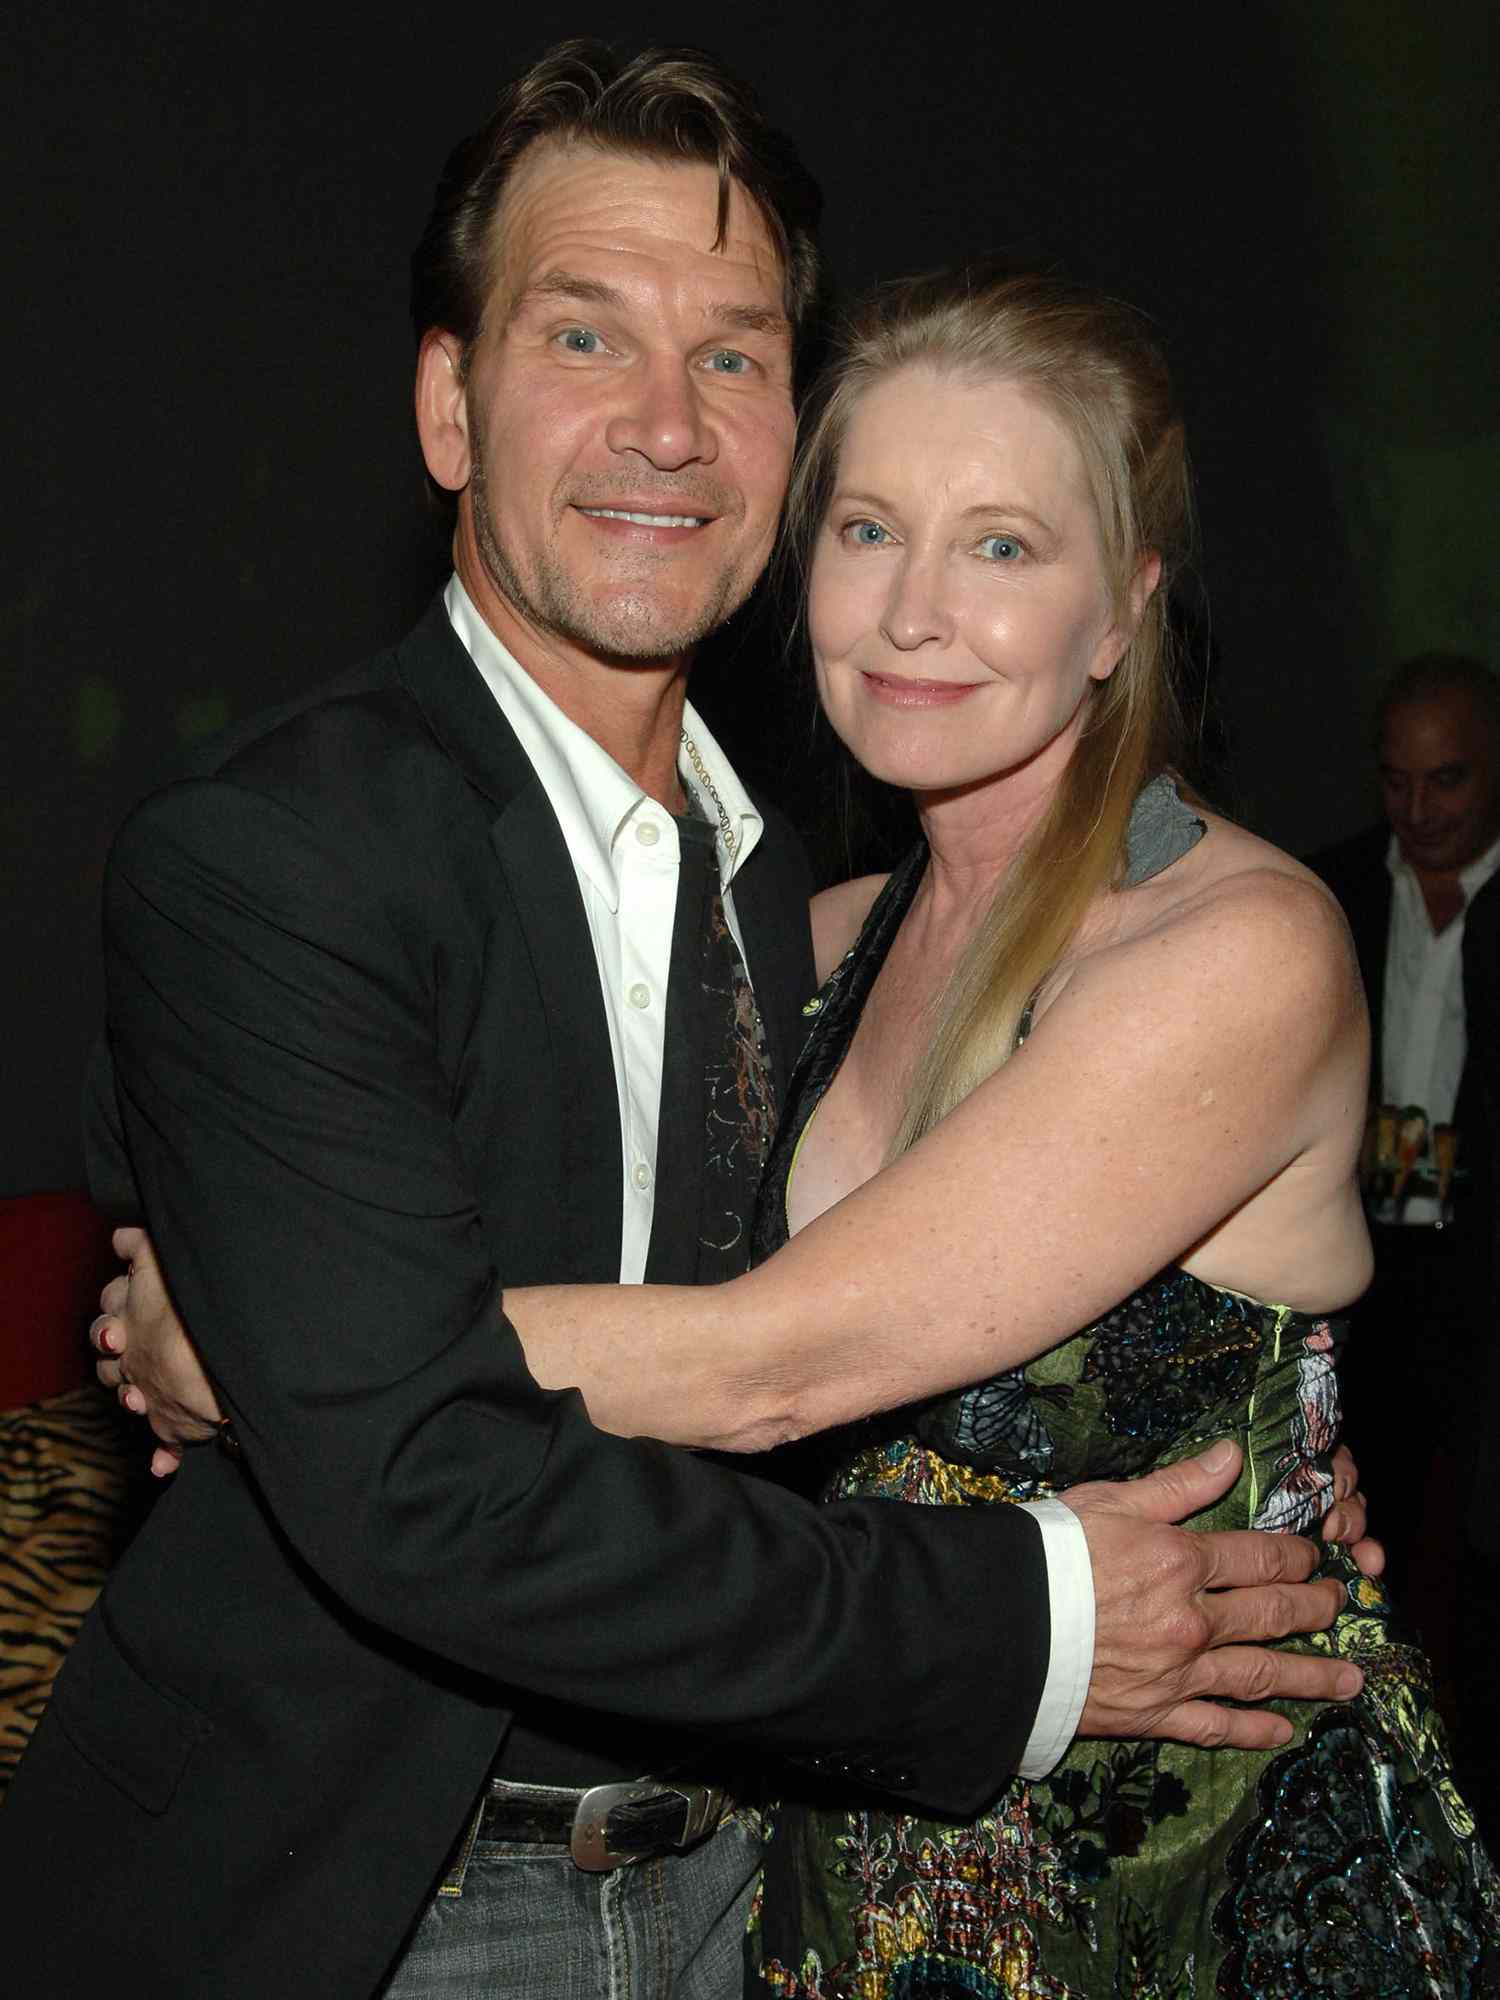 Patrick Swayze and Lisa Niemi at Planet Hollywood Resort & Casino's Grand Opening Weekend